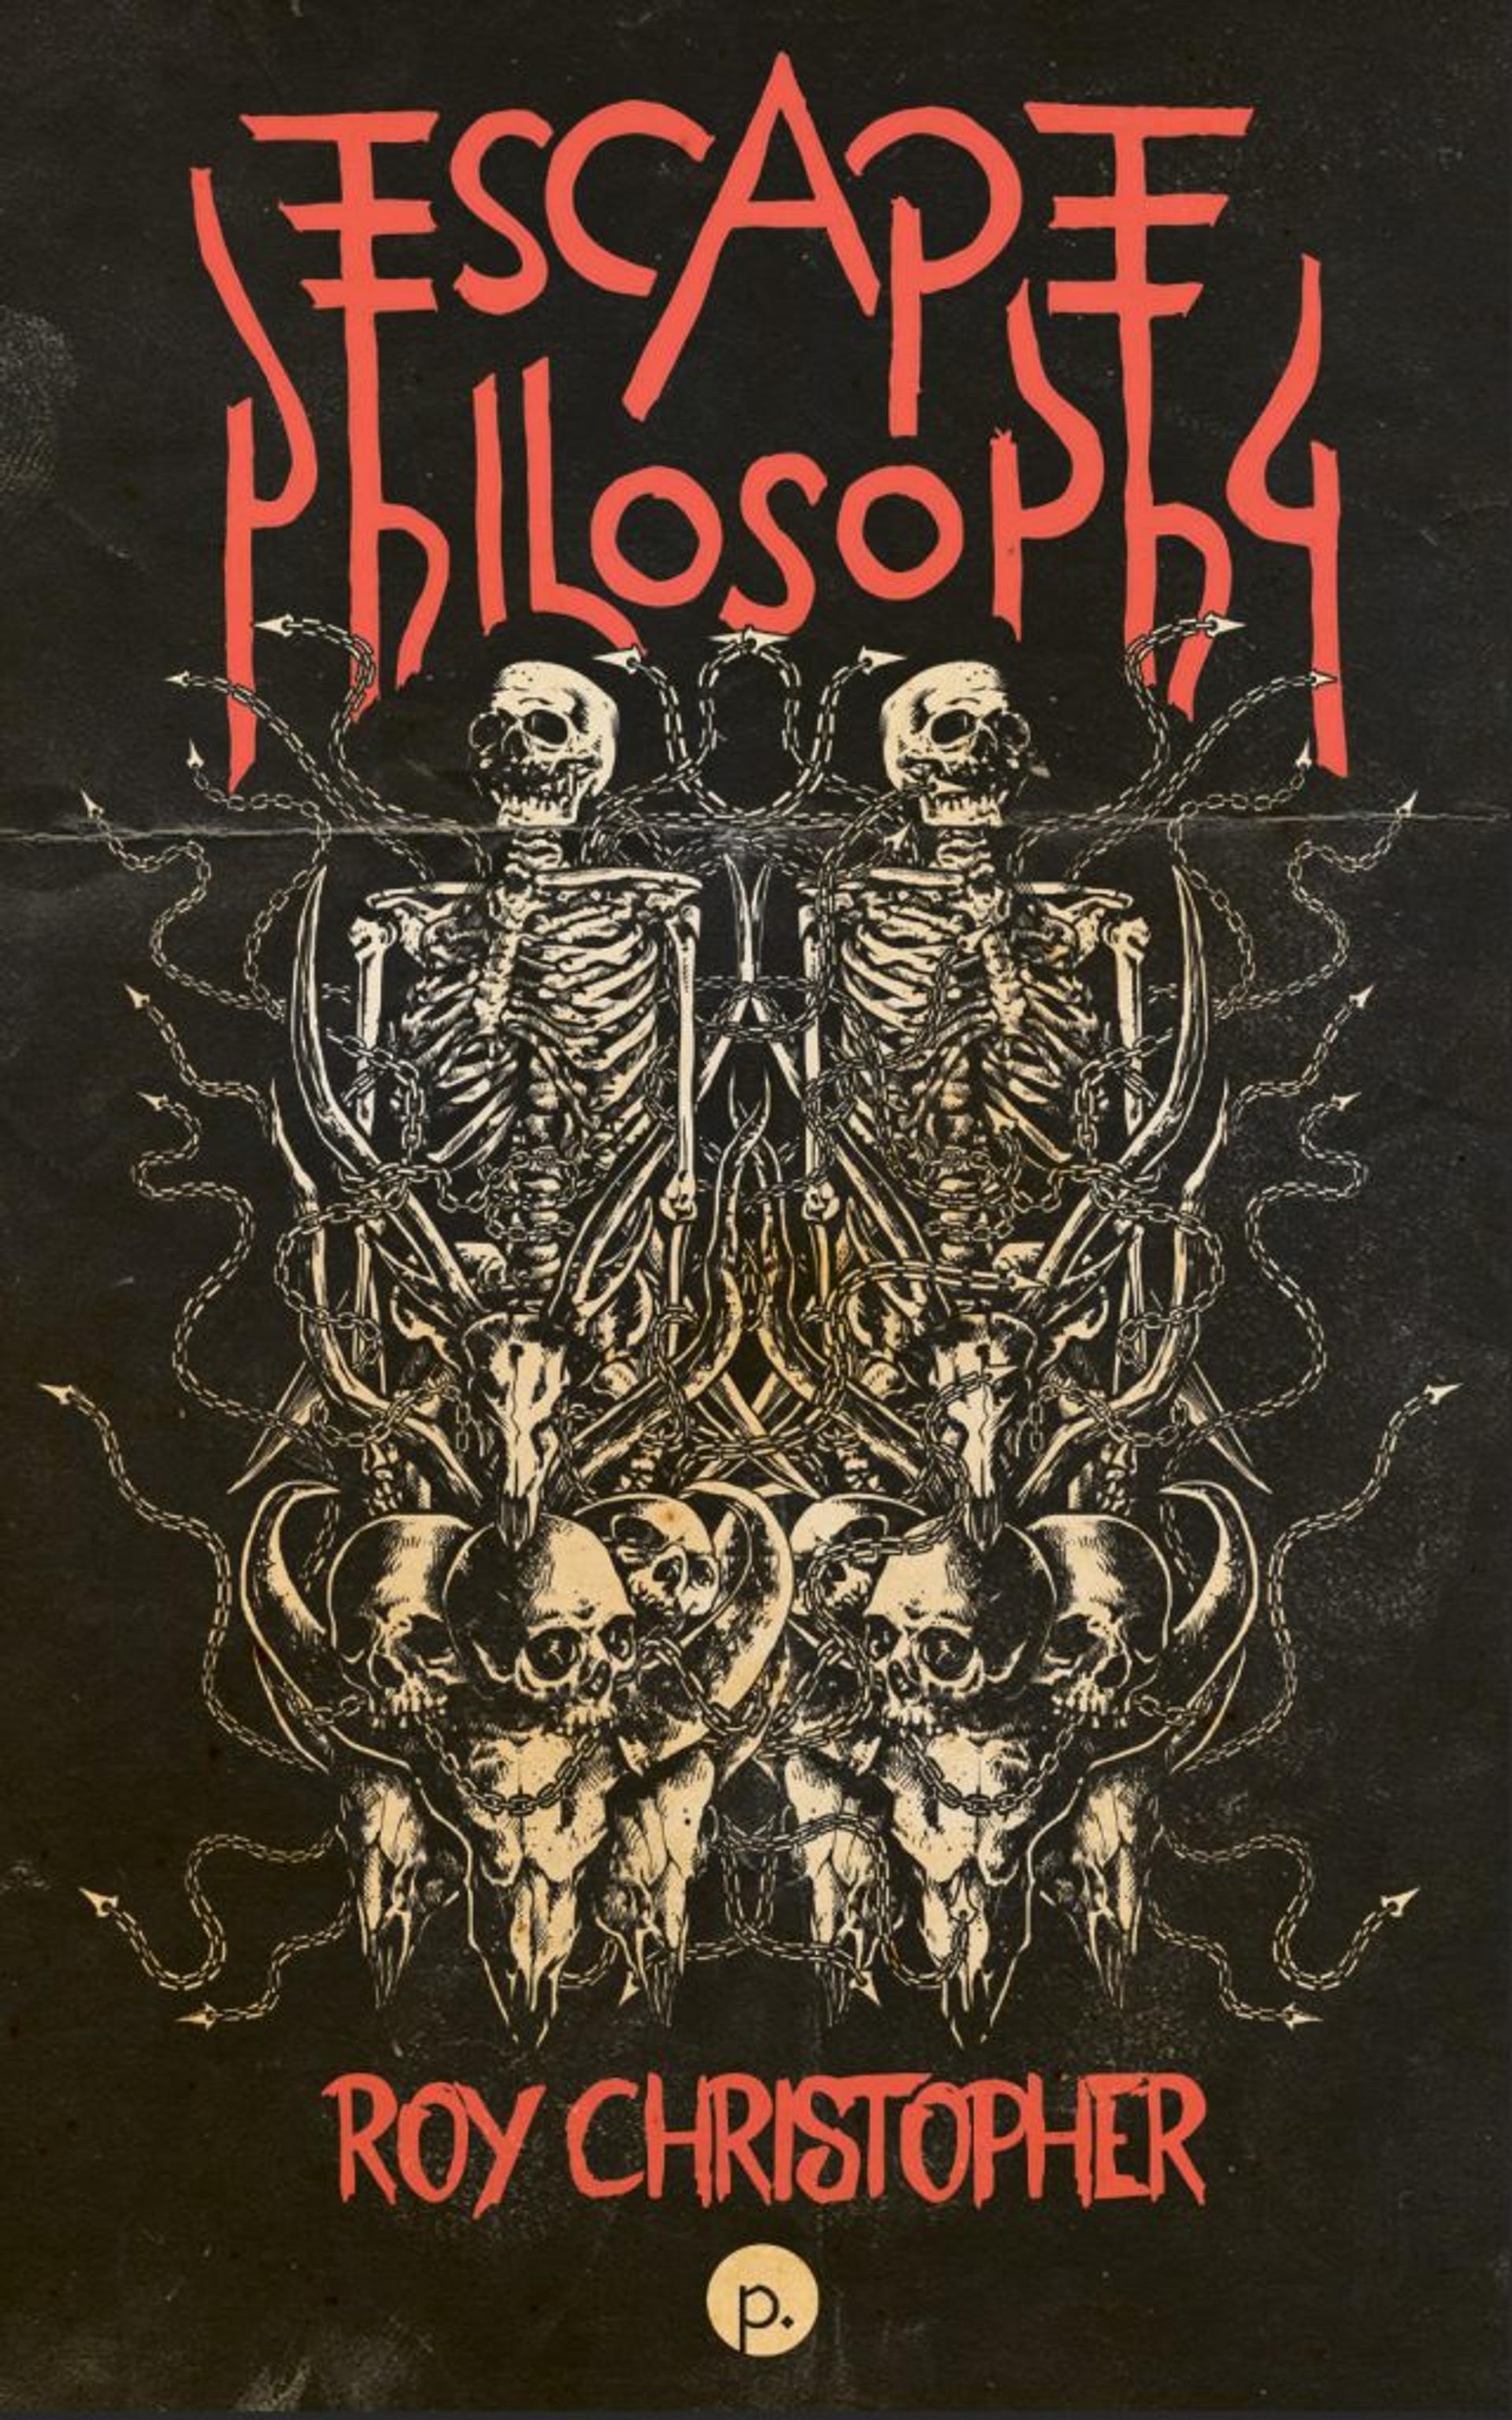 Cover of book titled Escape Philosophy